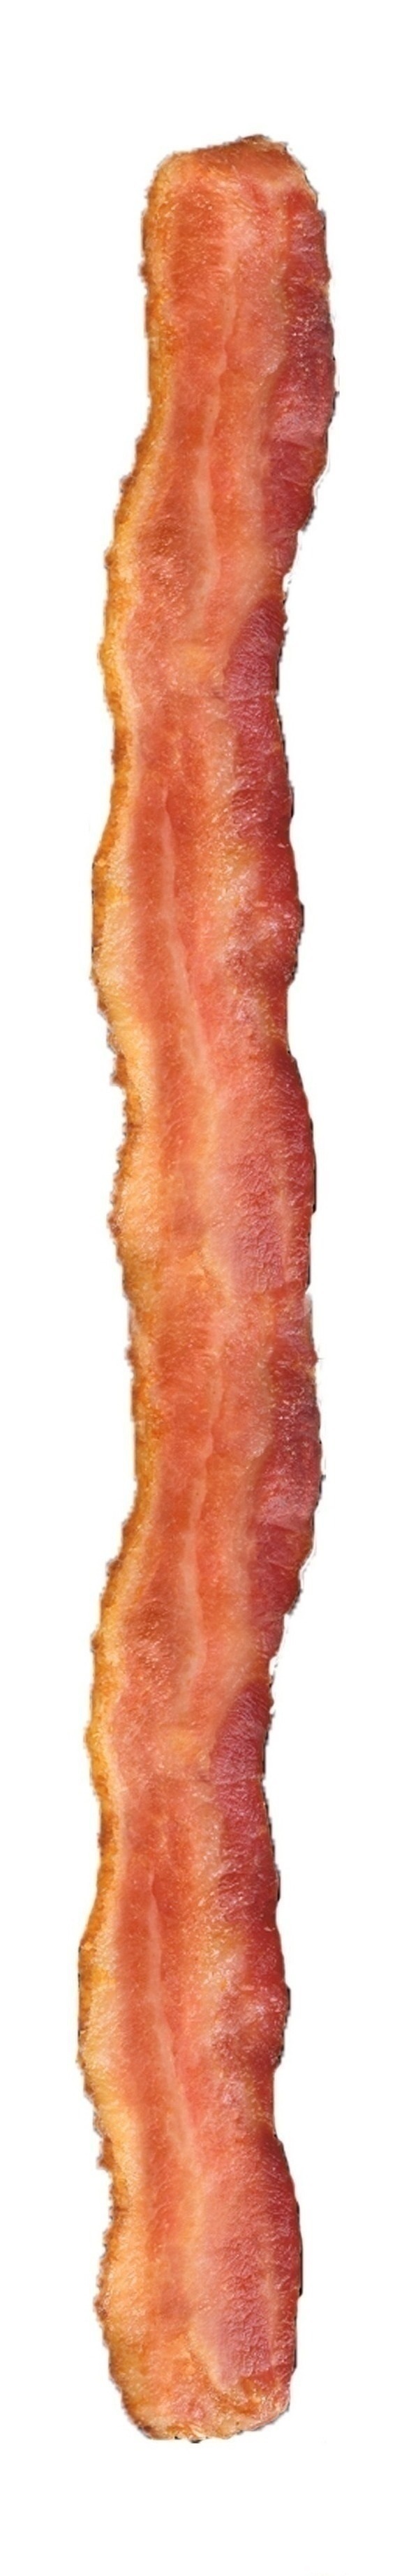 Bacon Strips by OneSmallSquar